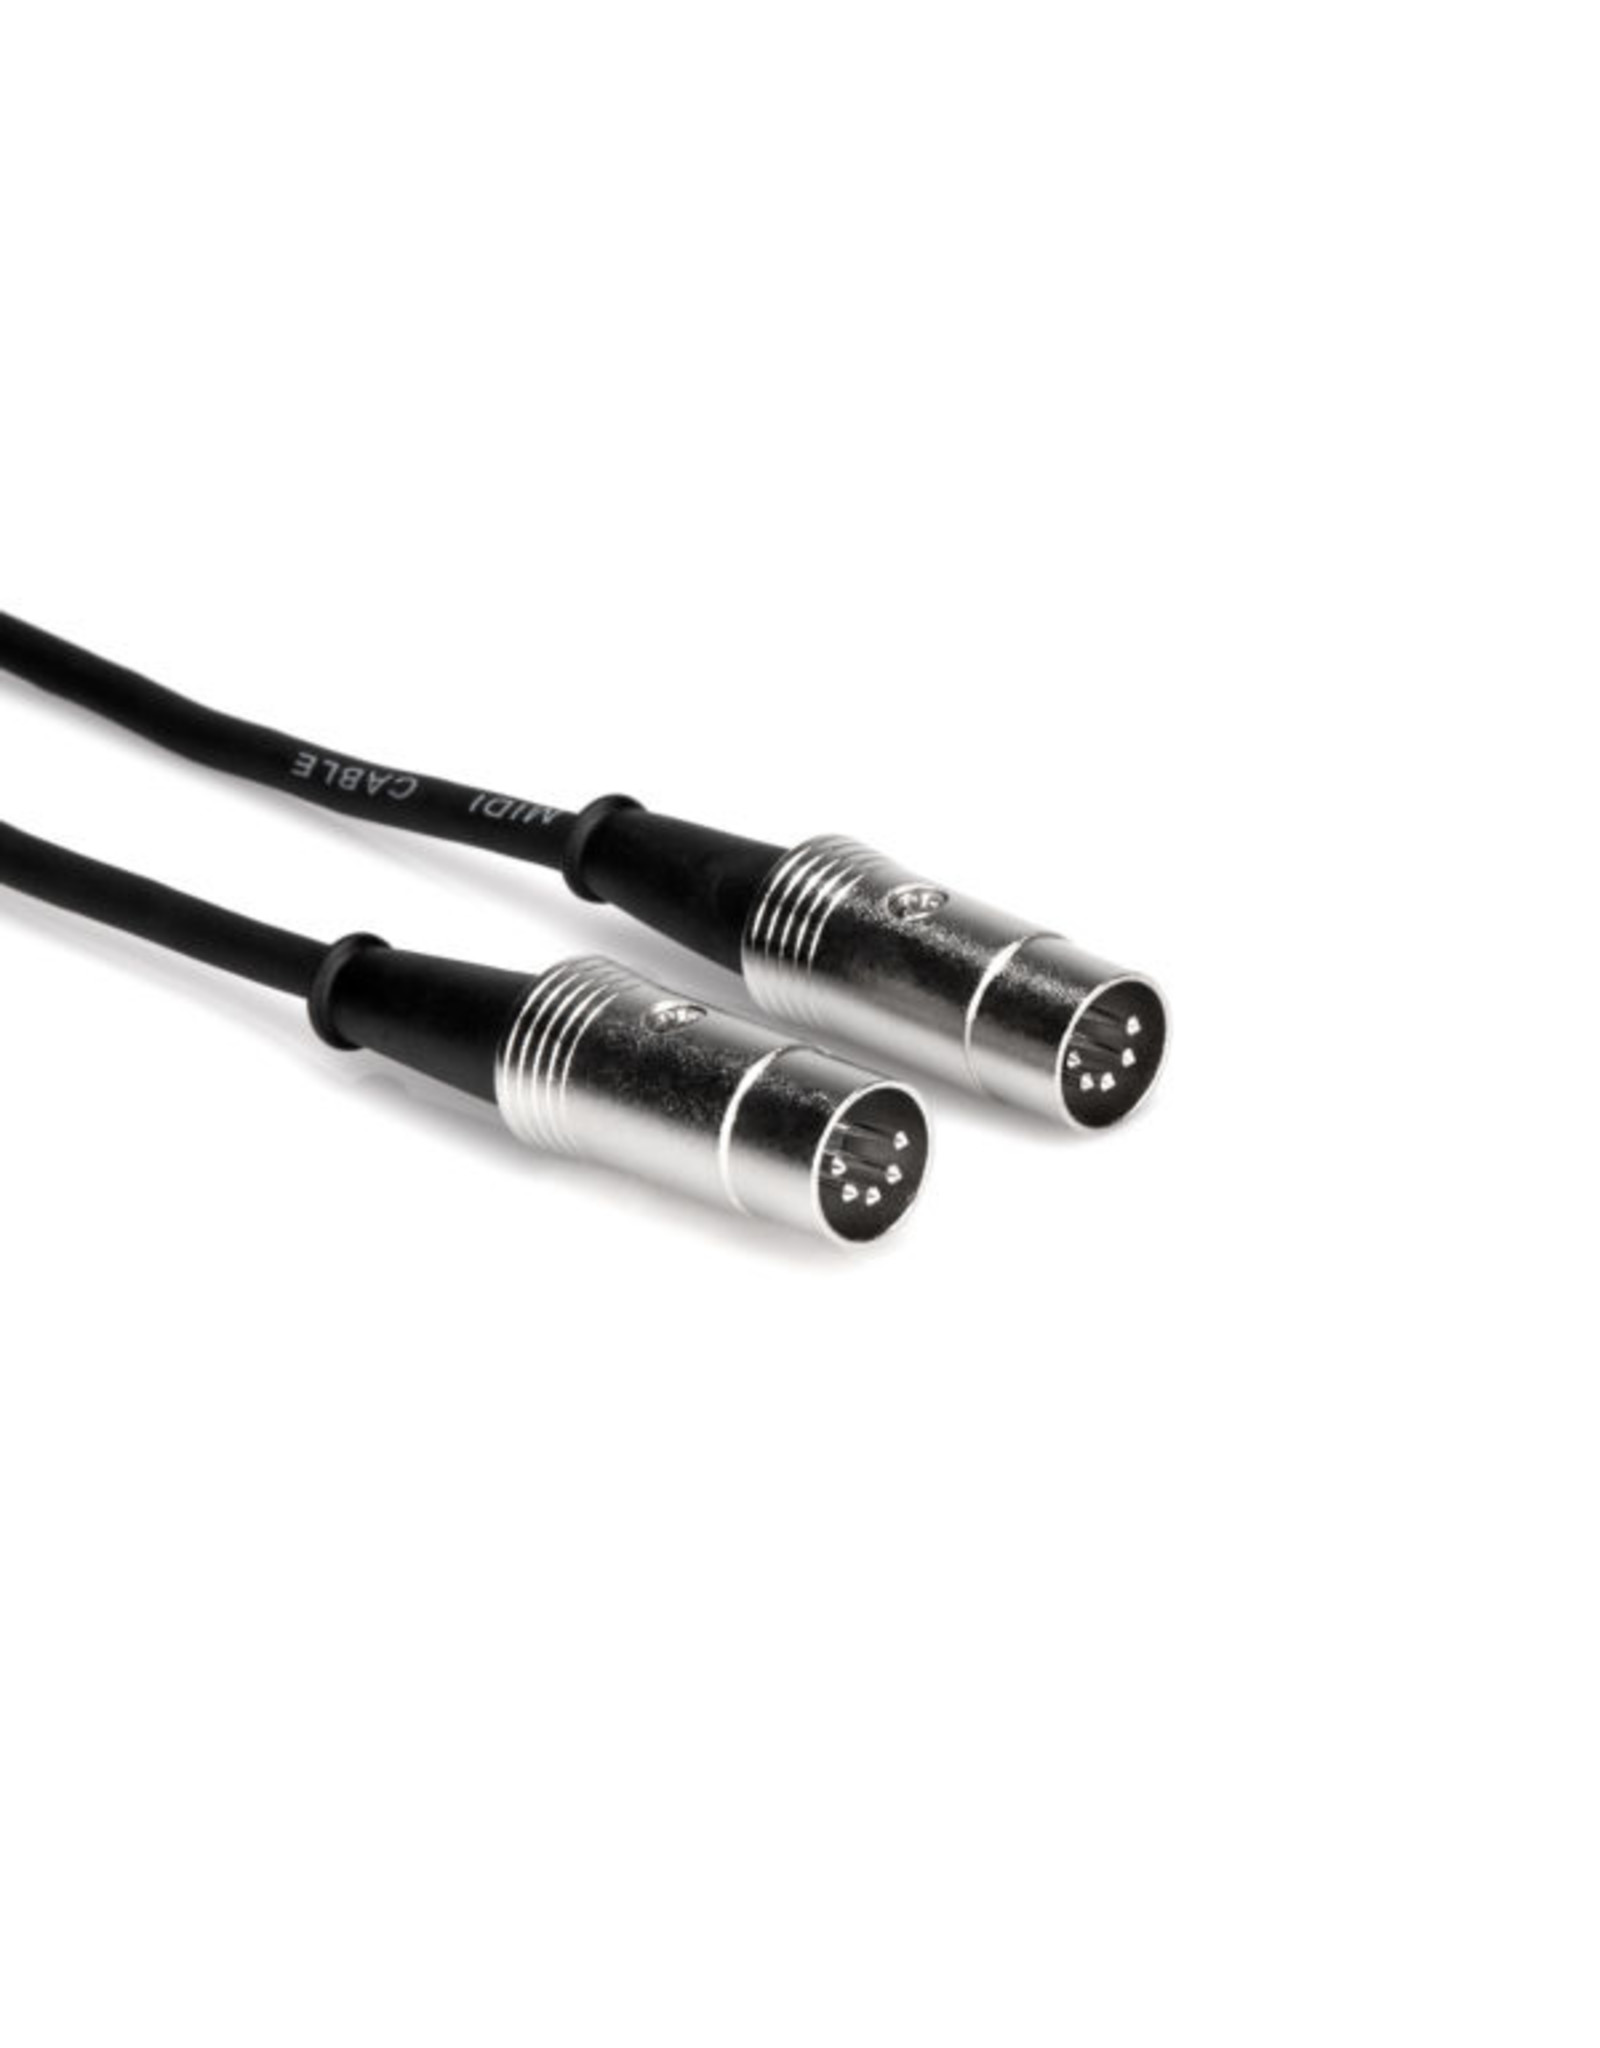 Hosa Pro MIDI Cable 3ft, 5 pin DIN to Same